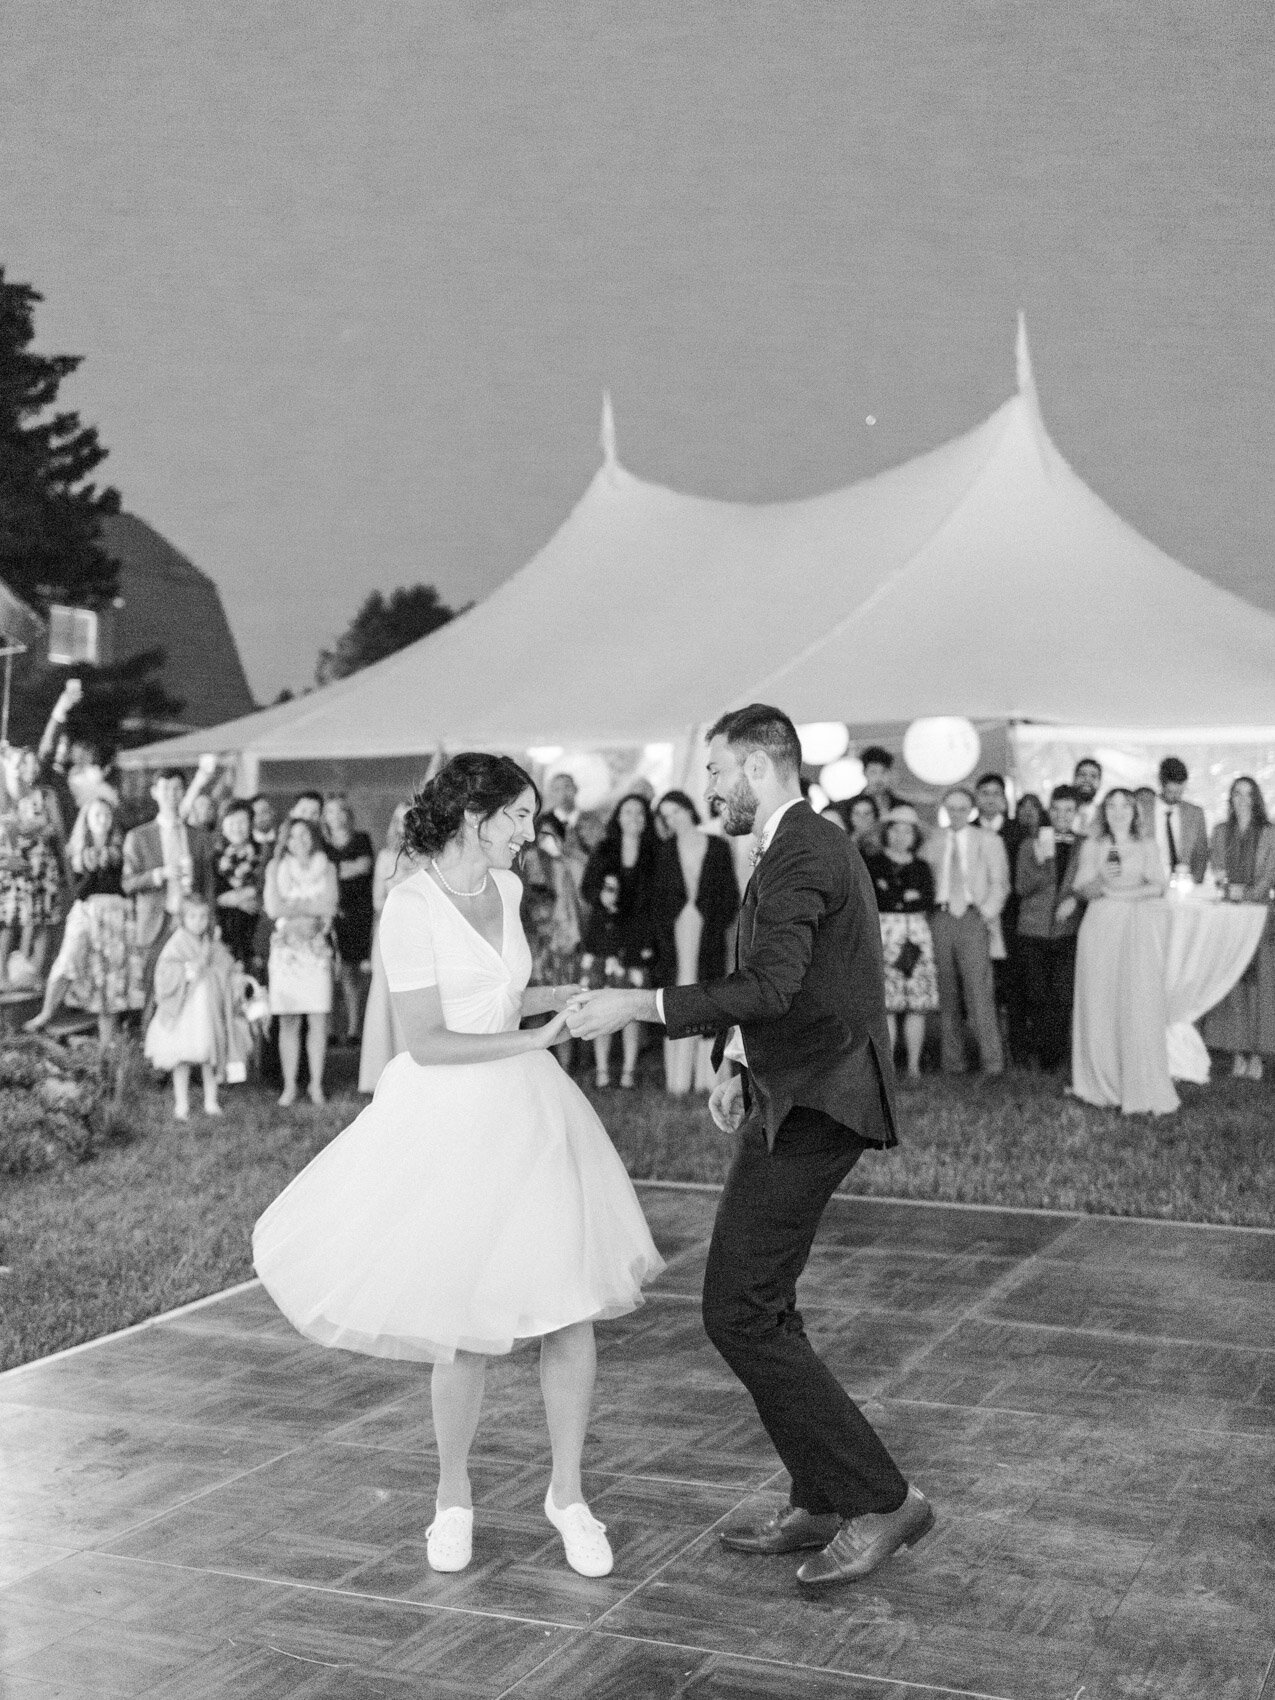 bride and groom swing dancing together at their outdoor summer wedding under the stars